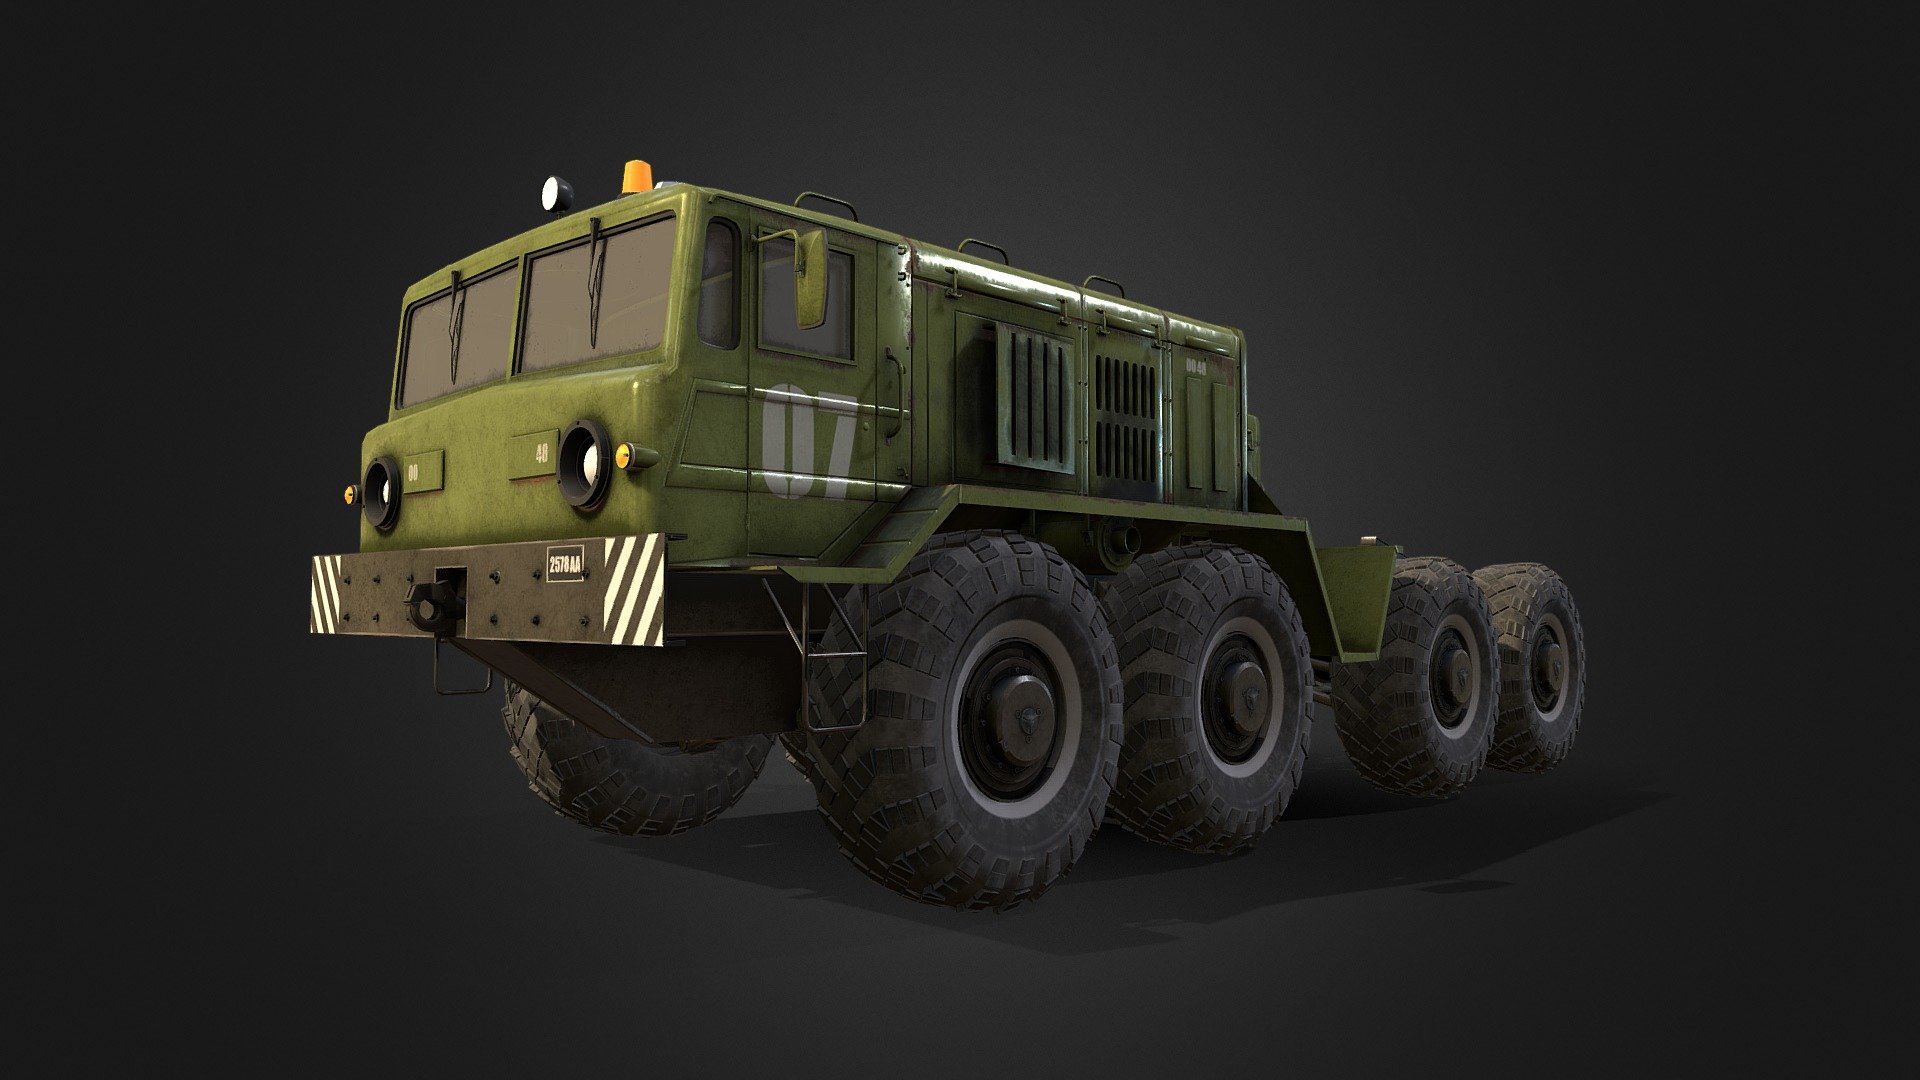 The MAZ- 537 is a 12-cylinder diesel engine-powered military truck tractor, originally designed for loads up to 50 tons (using semitrailers such as the ChMZAP-9990 or ChMZAP-5247G, for example) with later versions providing a maximum load of 65 tons. It has been manufactured by the Minsk Automobile Plant (from 1959 to 1965) and the Kurgan Wheel Tractor Plant from 1963 until halt of production in 1990 3d model